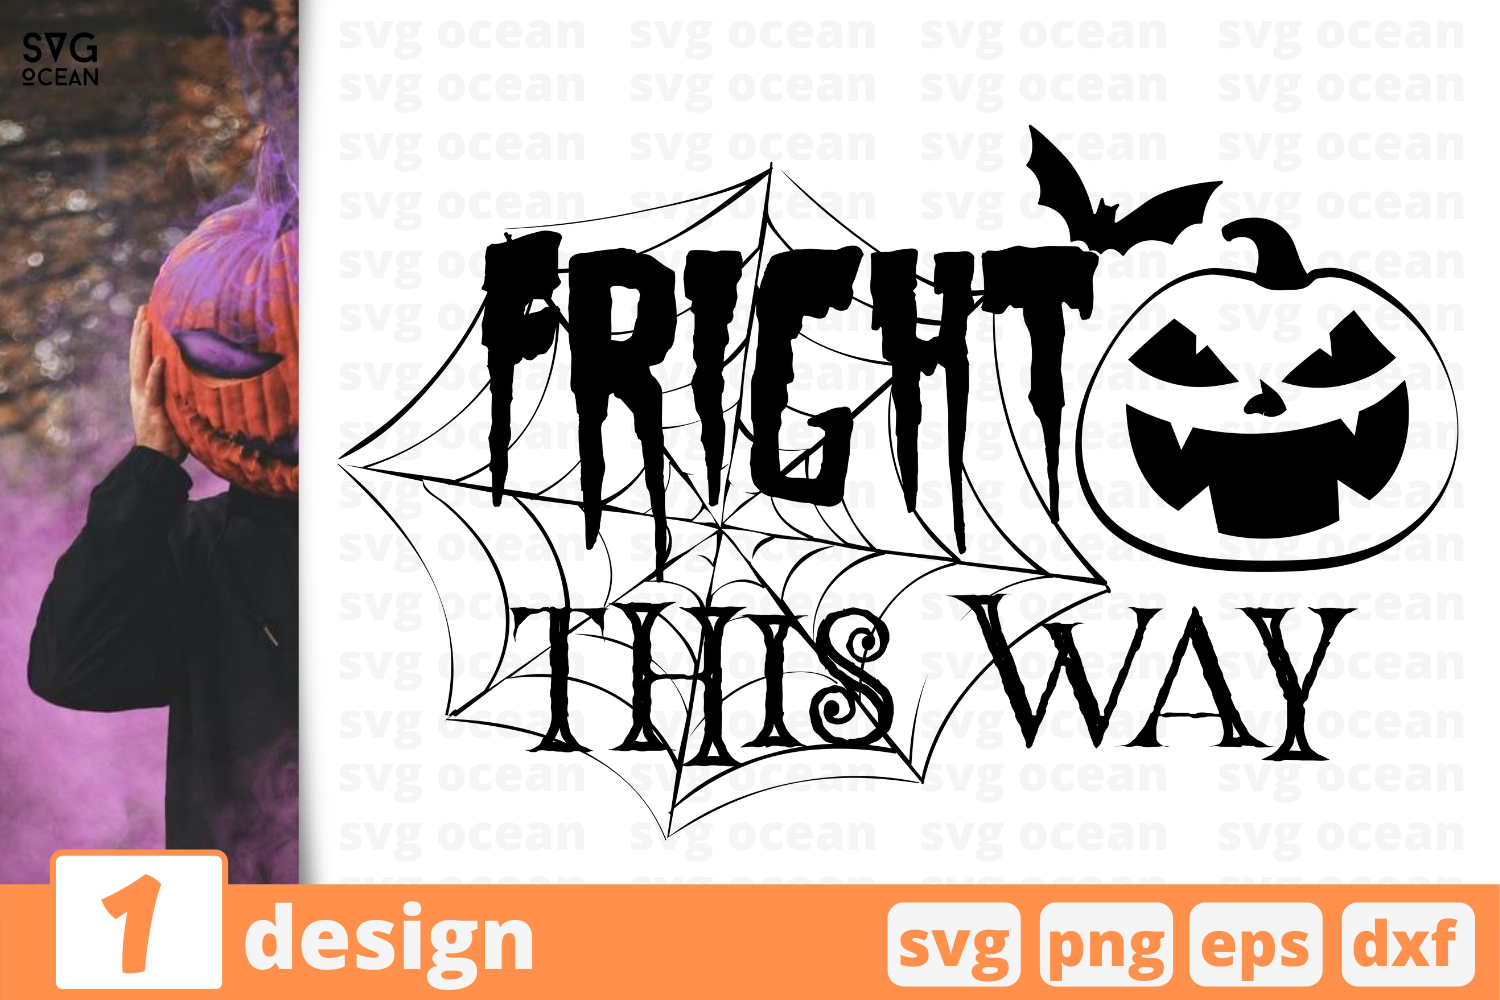 1 Fright This Way Halloween Quotes Cricut Svg By Svgocean Thehungryjpeg Com